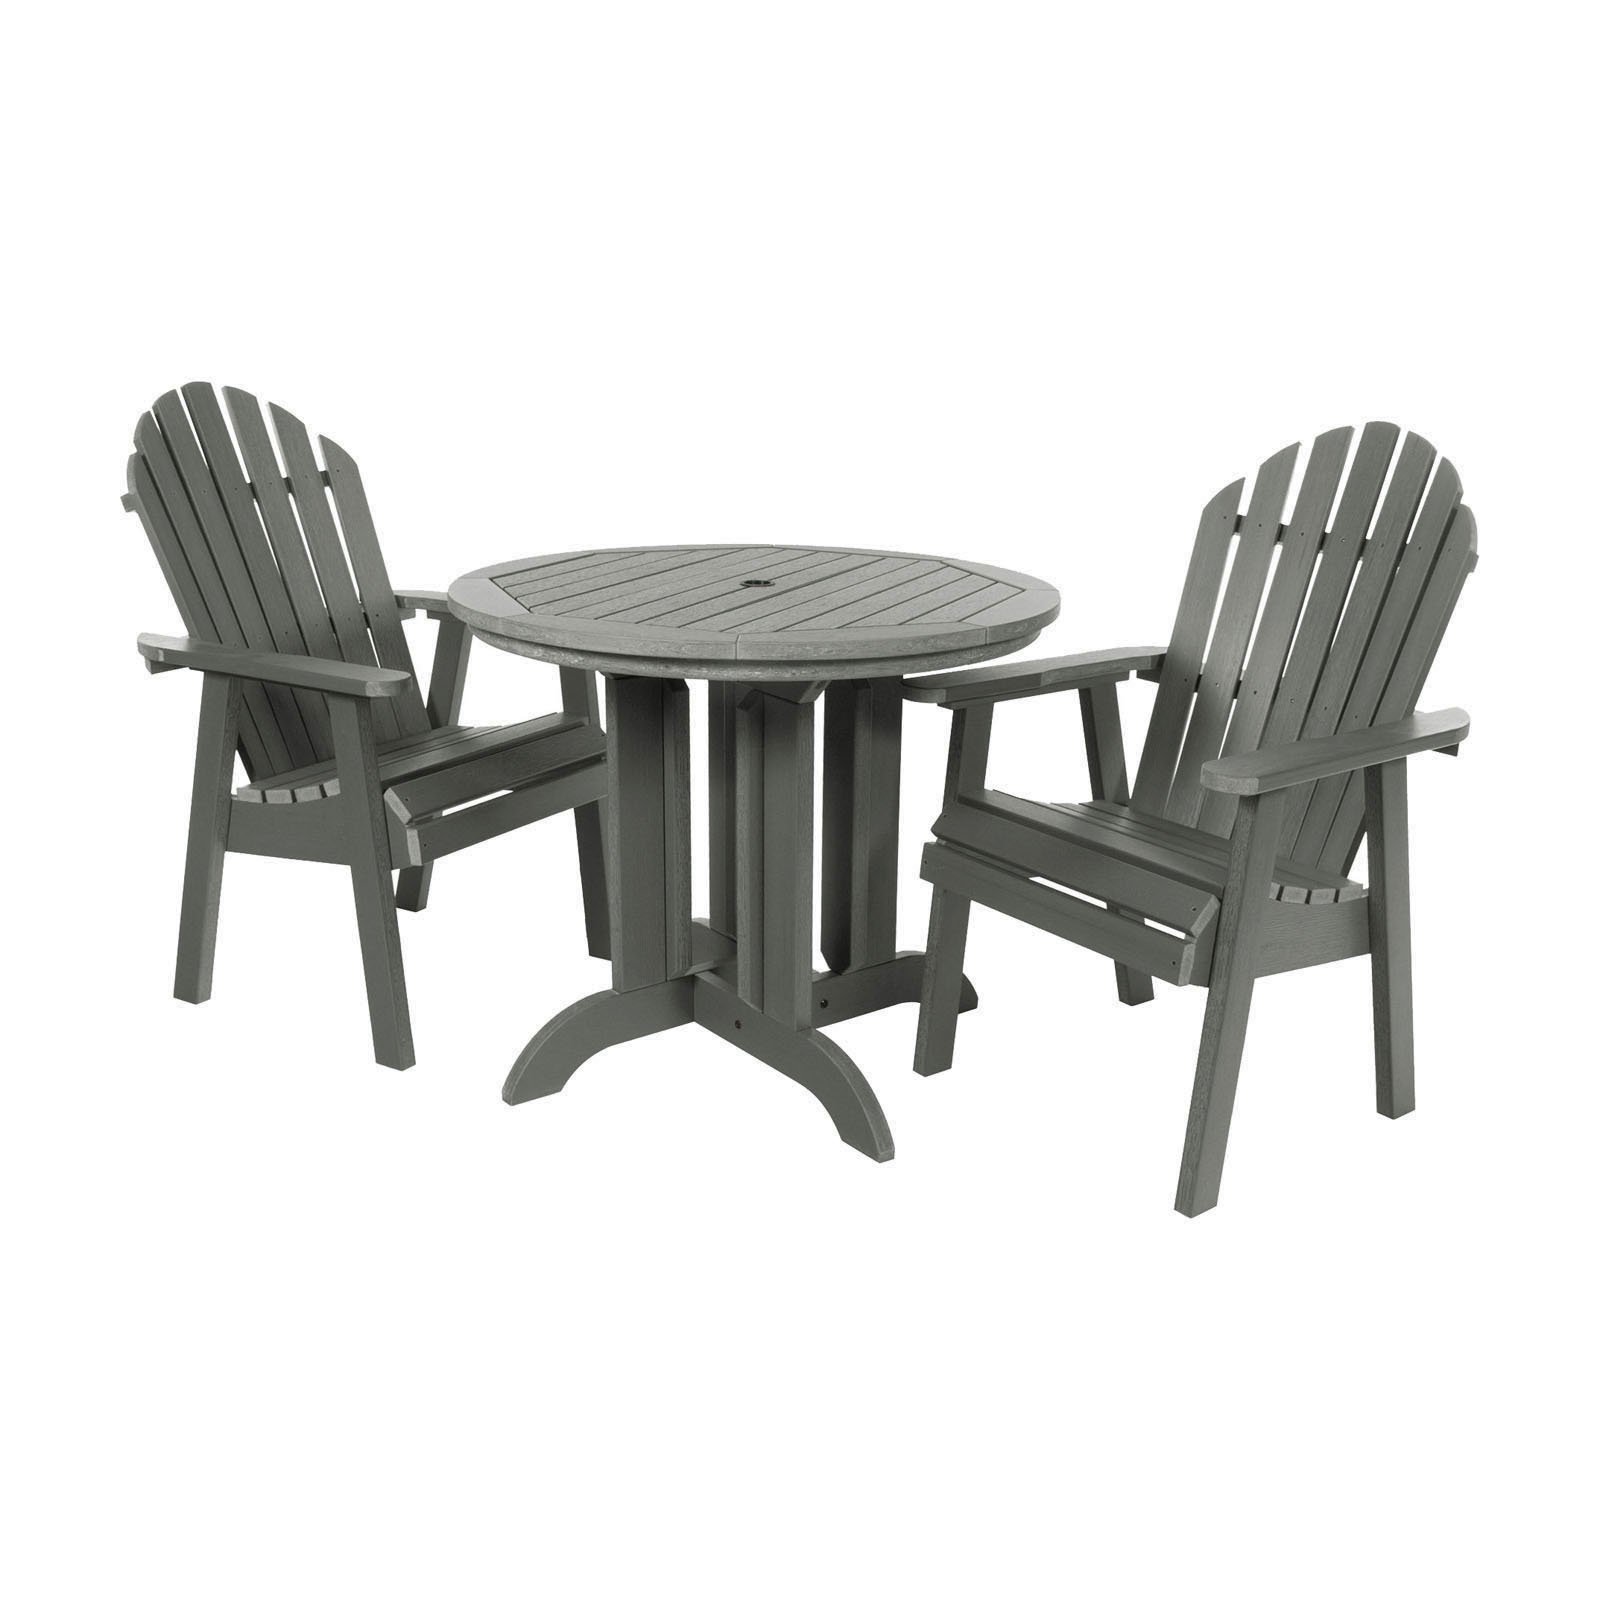 The Sequoia Professional Commercial Grade 3 Pc Muskoka Adirondack Bistro Dining Set with 36? Table - image 1 of 2